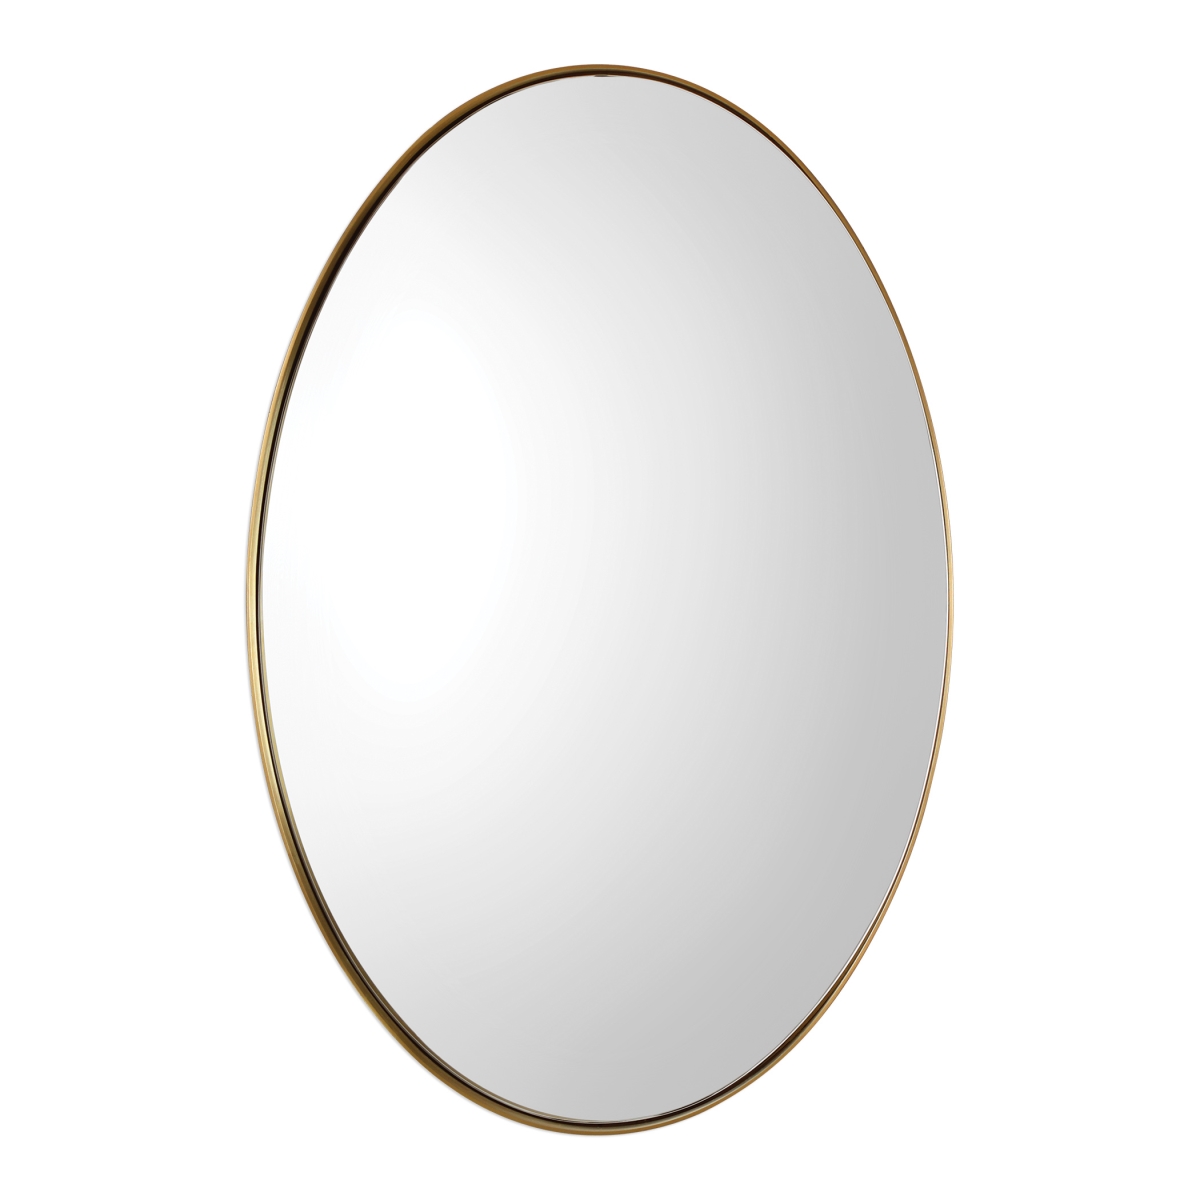 Picture of 212 Main 09353 Pursley Brass Oval Mirror